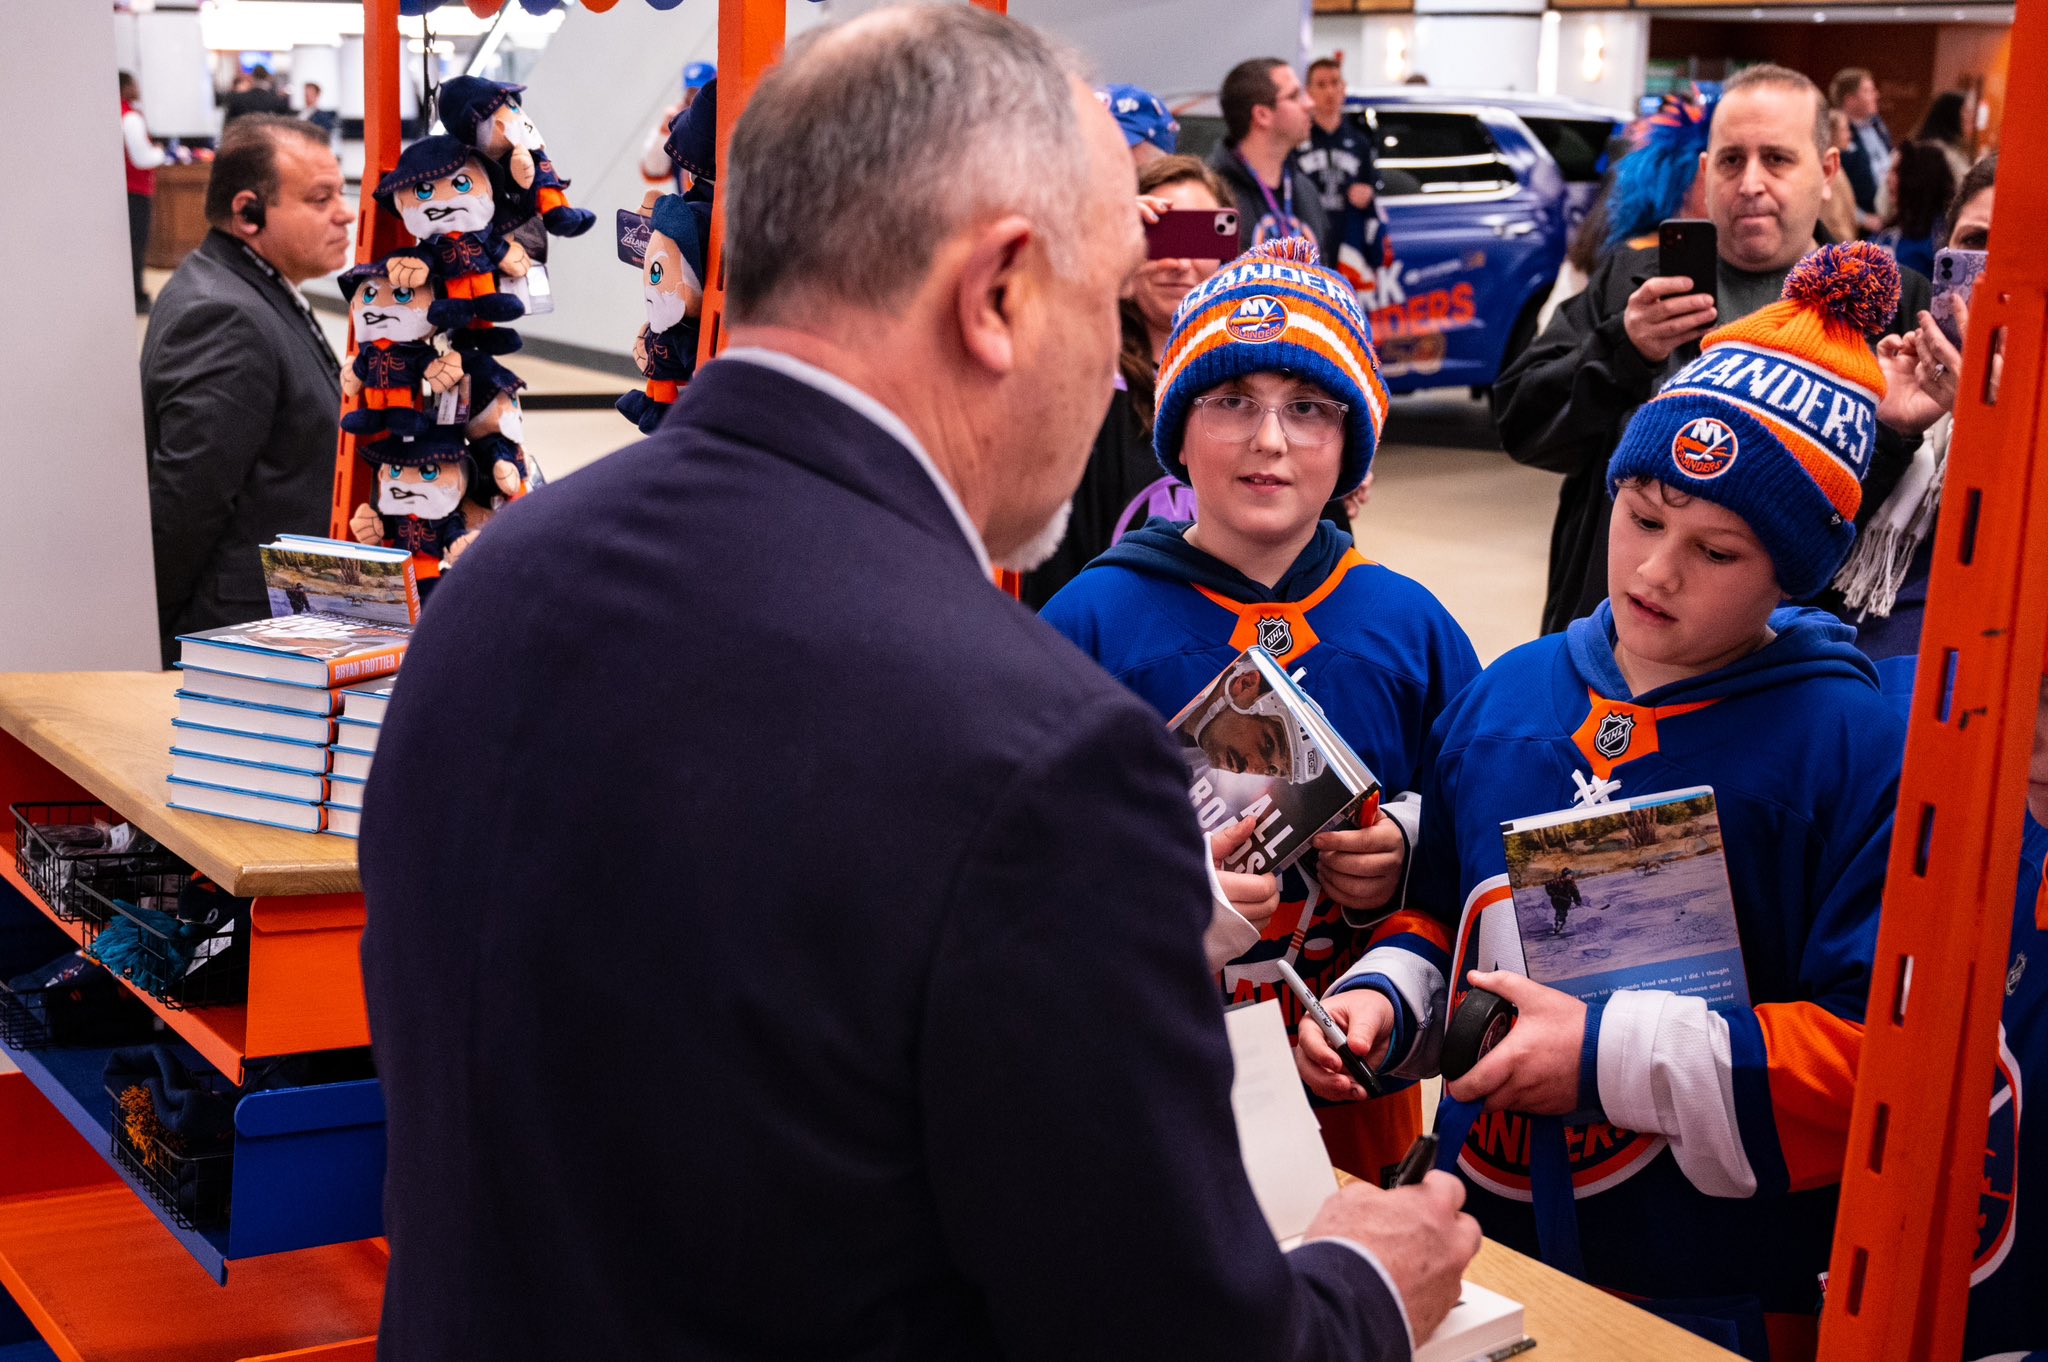 New York Islanders on X: The life story of Bryan Trottier is coming to  bookshelves in October. “All Roads Home” profiles Trottier's story of  becoming an #NHL player and his experience as